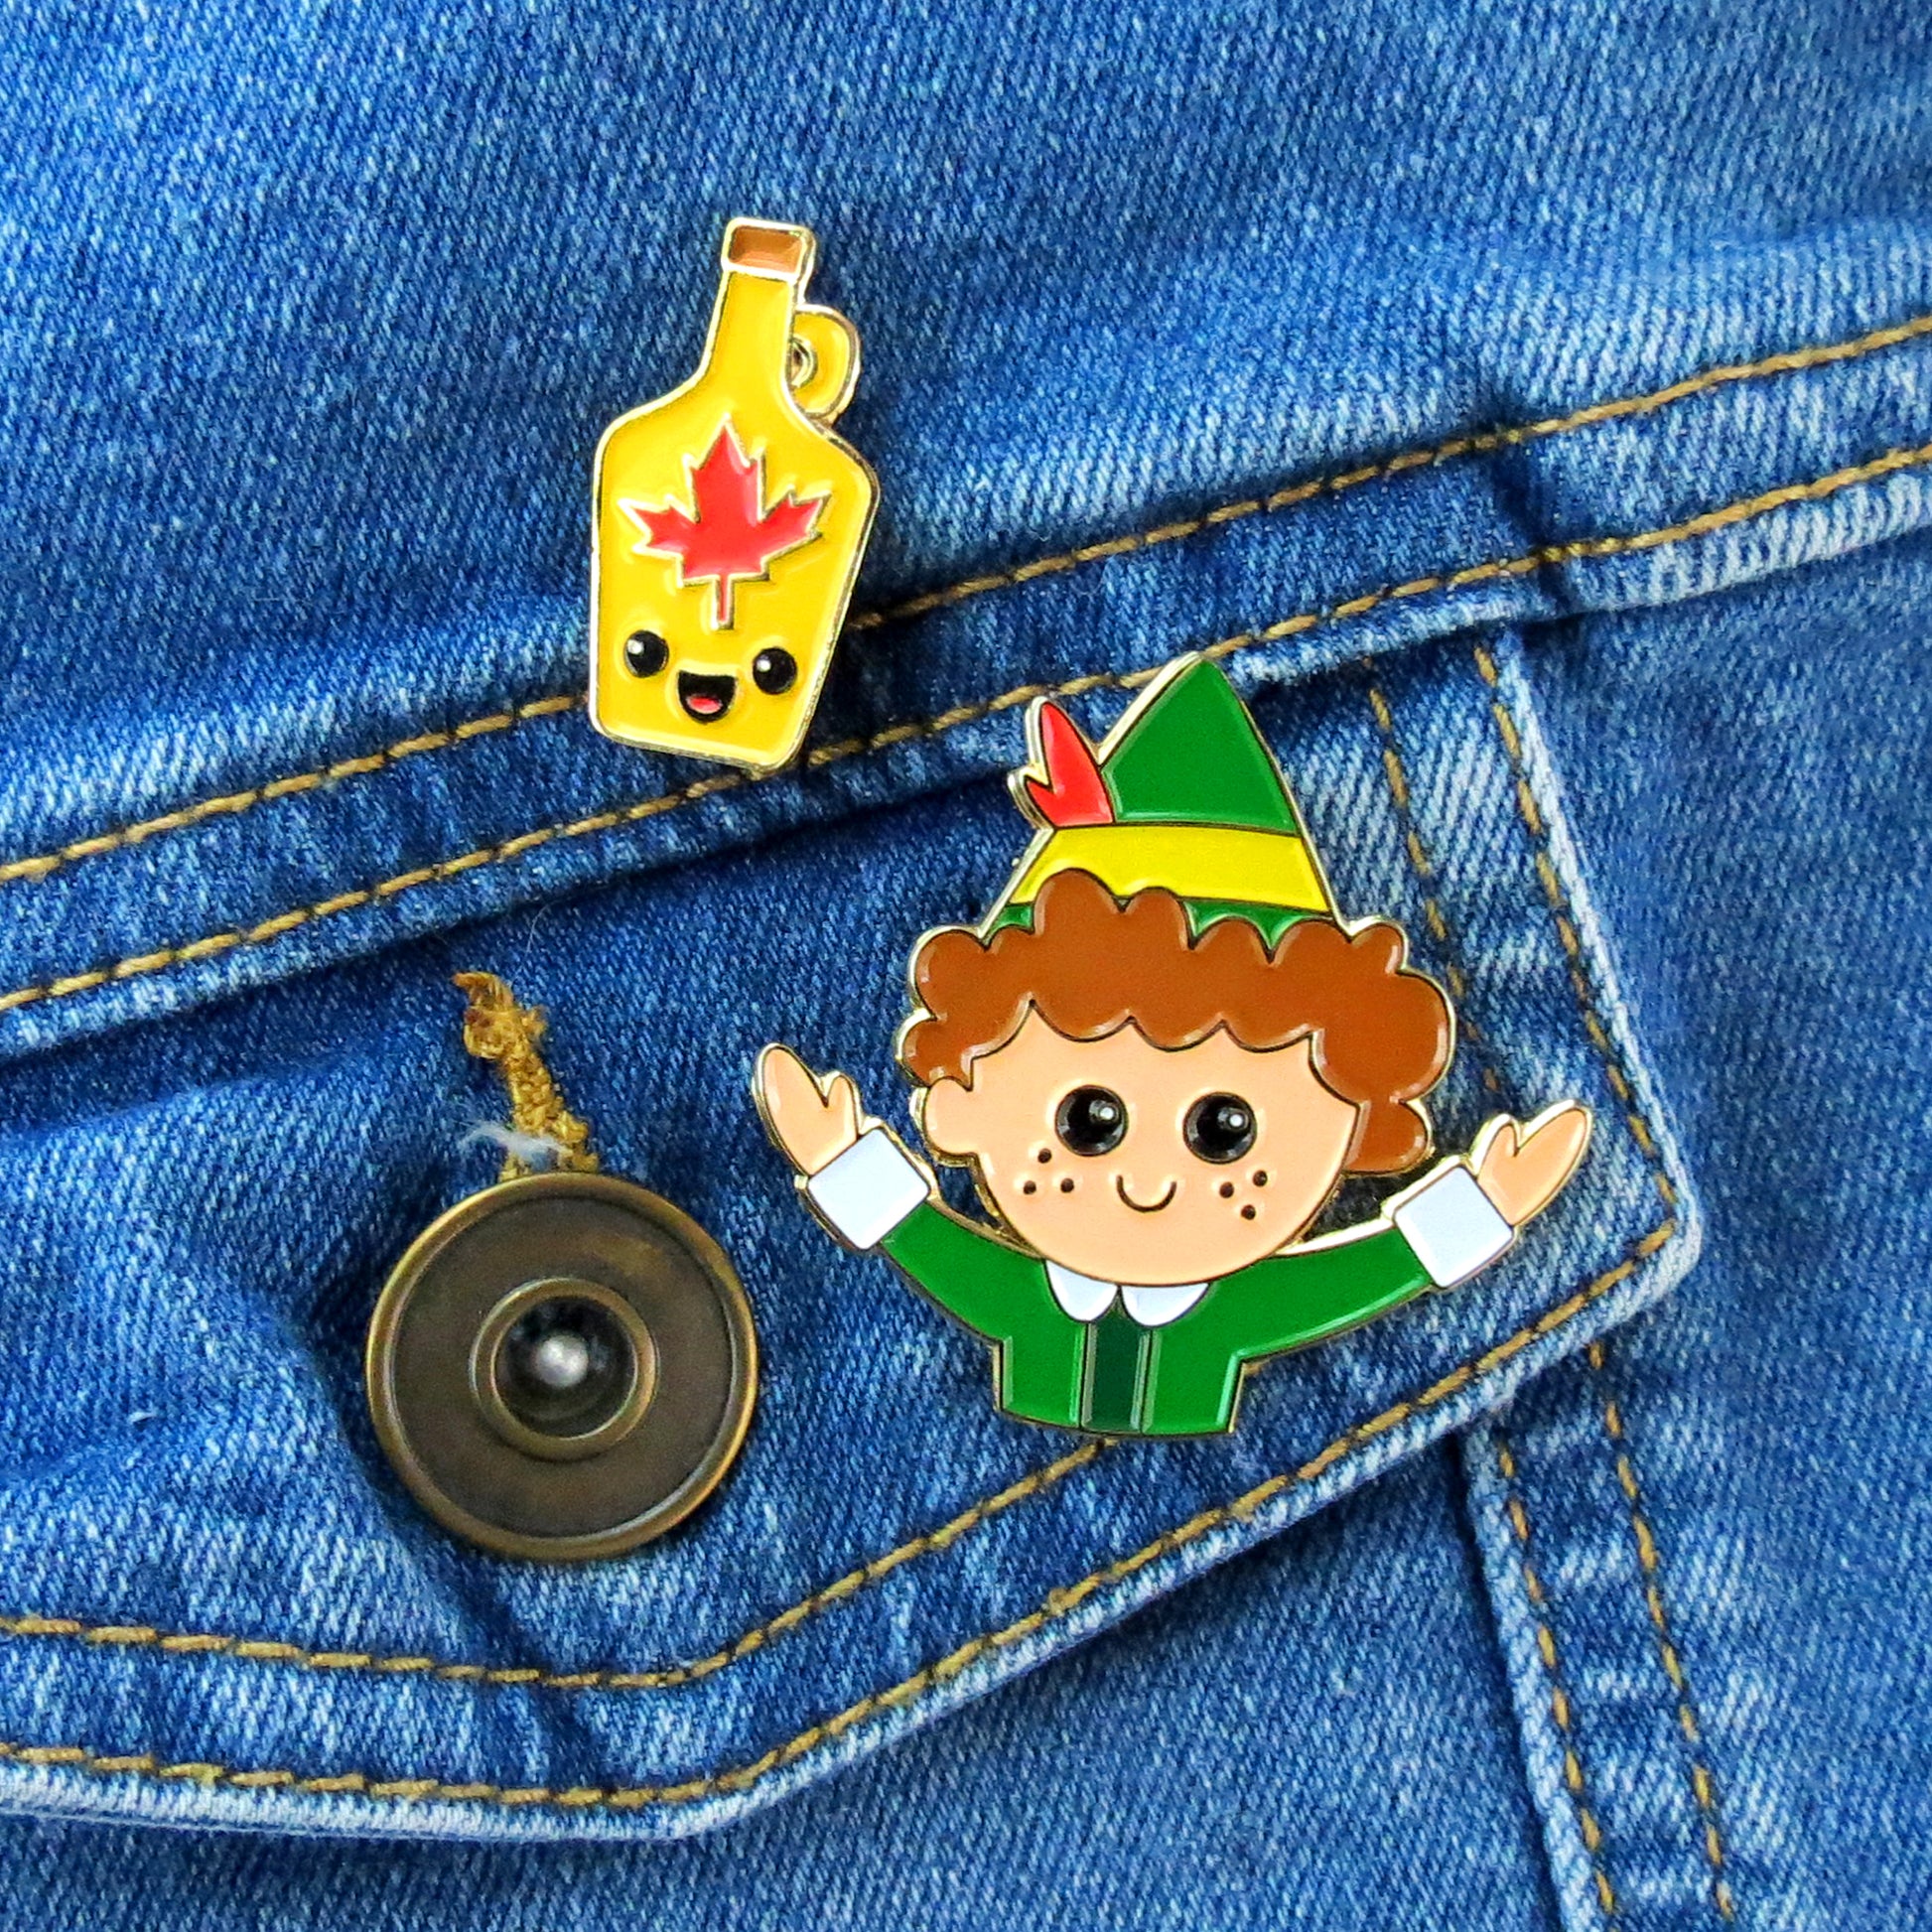 Buddy the Elf and Maple Syrup enamel pin set on jean jacket pocket